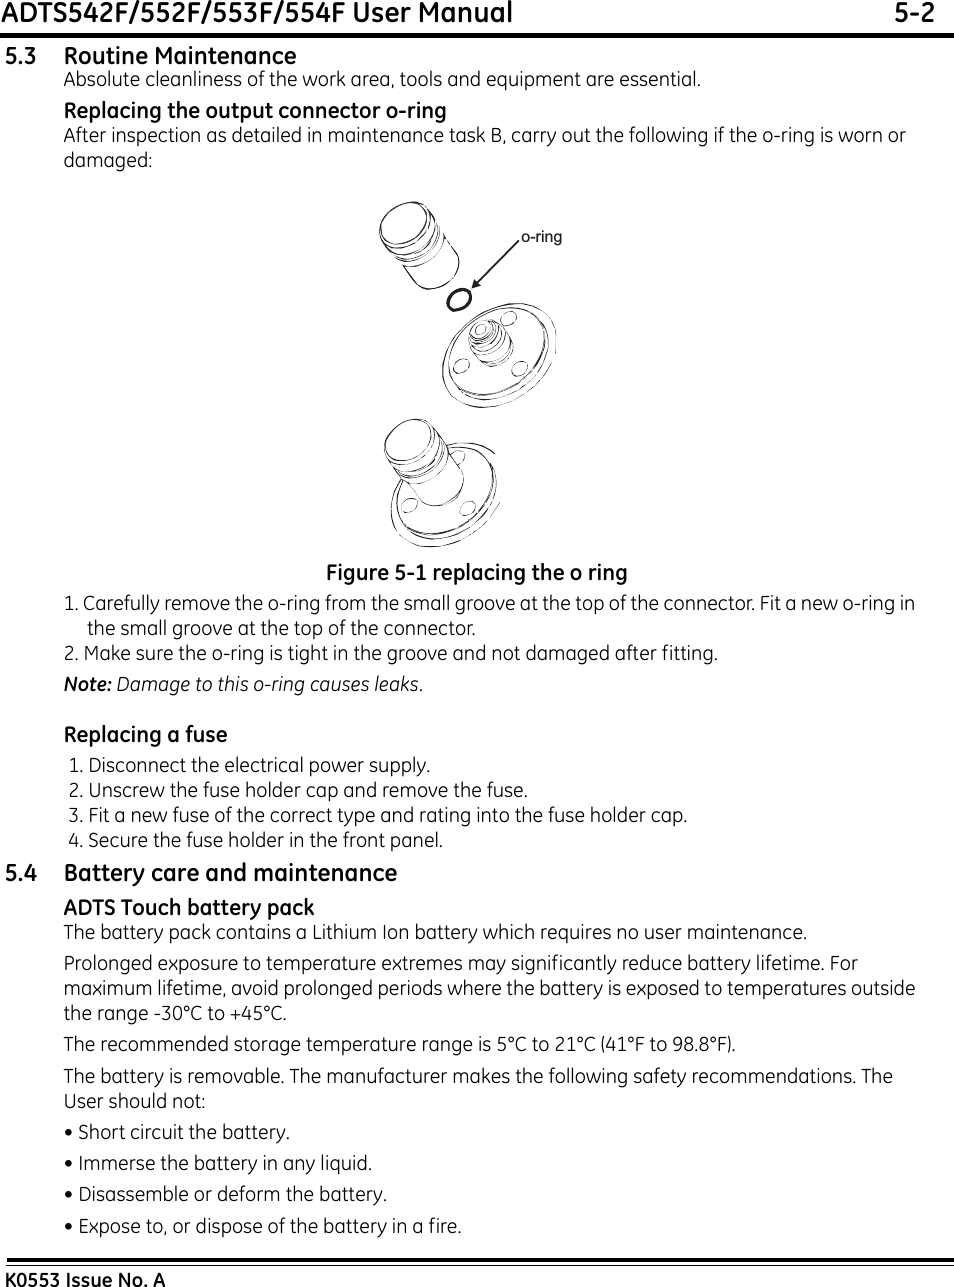 ADTS542F/552F/553F/554F User Manual  5-2K0553 Issue No. A5.3 Routine MaintenanceAbsolute cleanliness of the work area, tools and equipment are essential.Replacing the output connector o-ringAfter inspection as detailed in maintenance task B, carry out the following if the o-ring is worn or damaged:Figure 5-1 replacing the o ring1. Carefully remove the o-ring from the small groove at the top of the connector. Fit a new o-ring in the small groove at the top of the connector.2. Make sure the o-ring is tight in the groove and not damaged after fitting. Note: Damage to this o-ring causes leaks.Replacing a fuse 1. Disconnect the electrical power supply. 2. Unscrew the fuse holder cap and remove the fuse. 3. Fit a new fuse of the correct type and rating into the fuse holder cap. 4. Secure the fuse holder in the front panel.5.4 Battery care and maintenanceADTS Touch battery packThe battery pack contains a Lithium Ion battery which requires no user maintenance.Prolonged exposure to temperature extremes may significantly reduce battery lifetime. For maximum lifetime, avoid prolonged periods where the battery is exposed to temperatures outside the range -30°C to +45°C.The recommended storage temperature range is 5°C to 21°C (41°F to 98.8°F).The battery is removable. The manufacturer makes the following safety recommendations. The User should not:• Short circuit the battery.• Immerse the battery in any liquid.• Disassemble or deform the battery.• Expose to, or dispose of the battery in a fire.o-ring